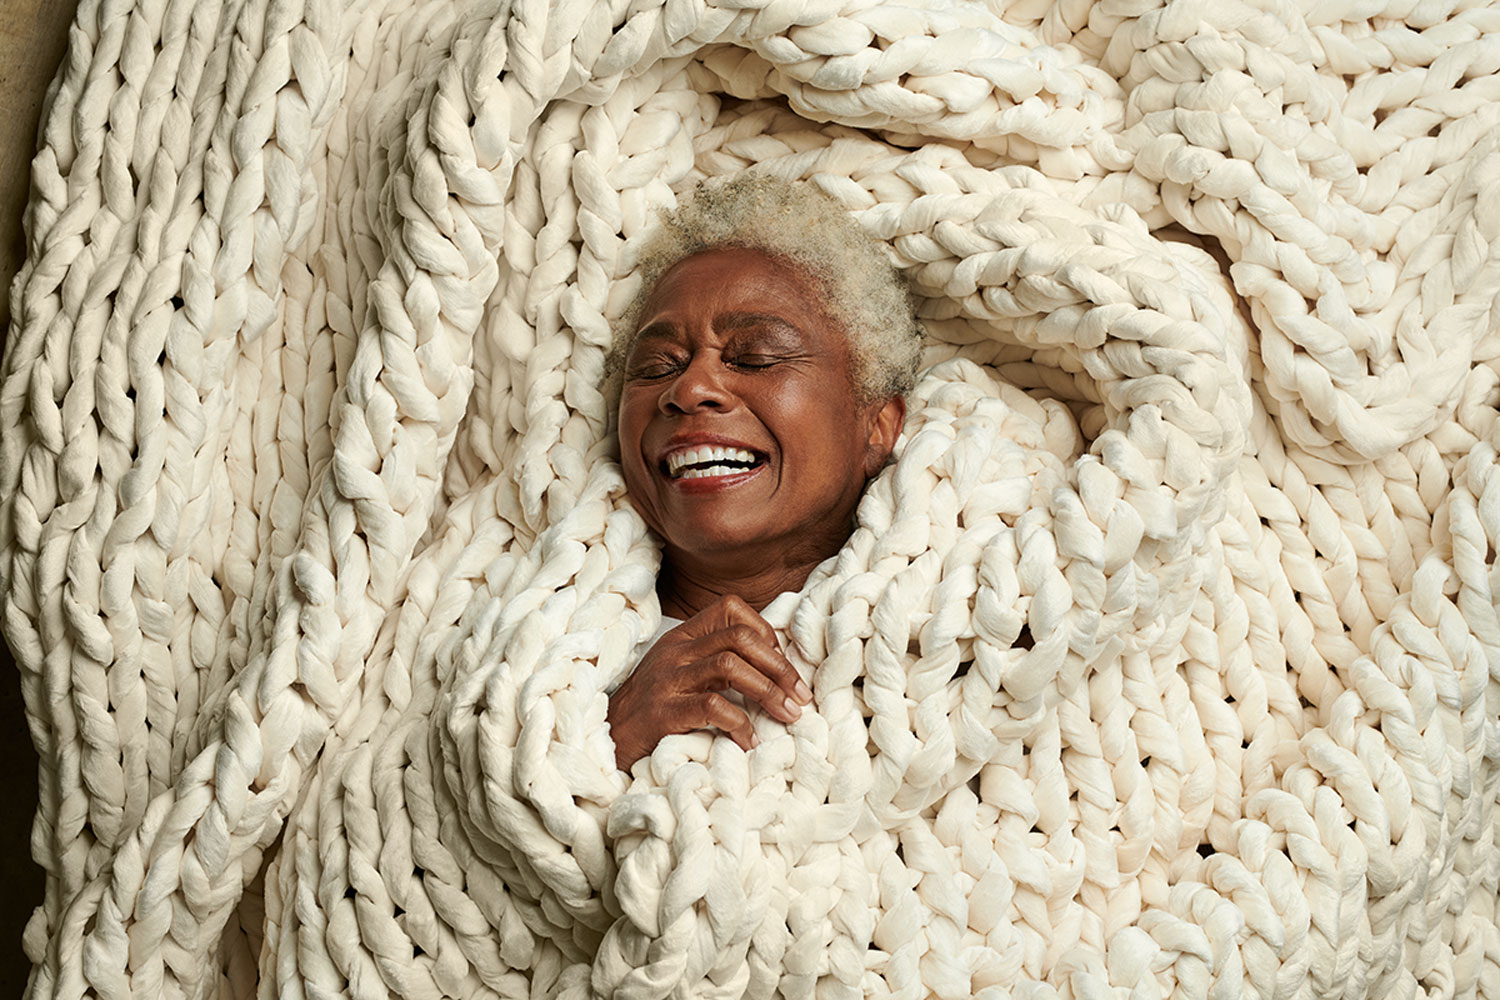 Aerial image of a gray-haired woman laying down and wrapped up in a large, off-white knit throw blanket. Only her face and one hand is visible. She is smiling widely with her eyes closed in a joyful manner.